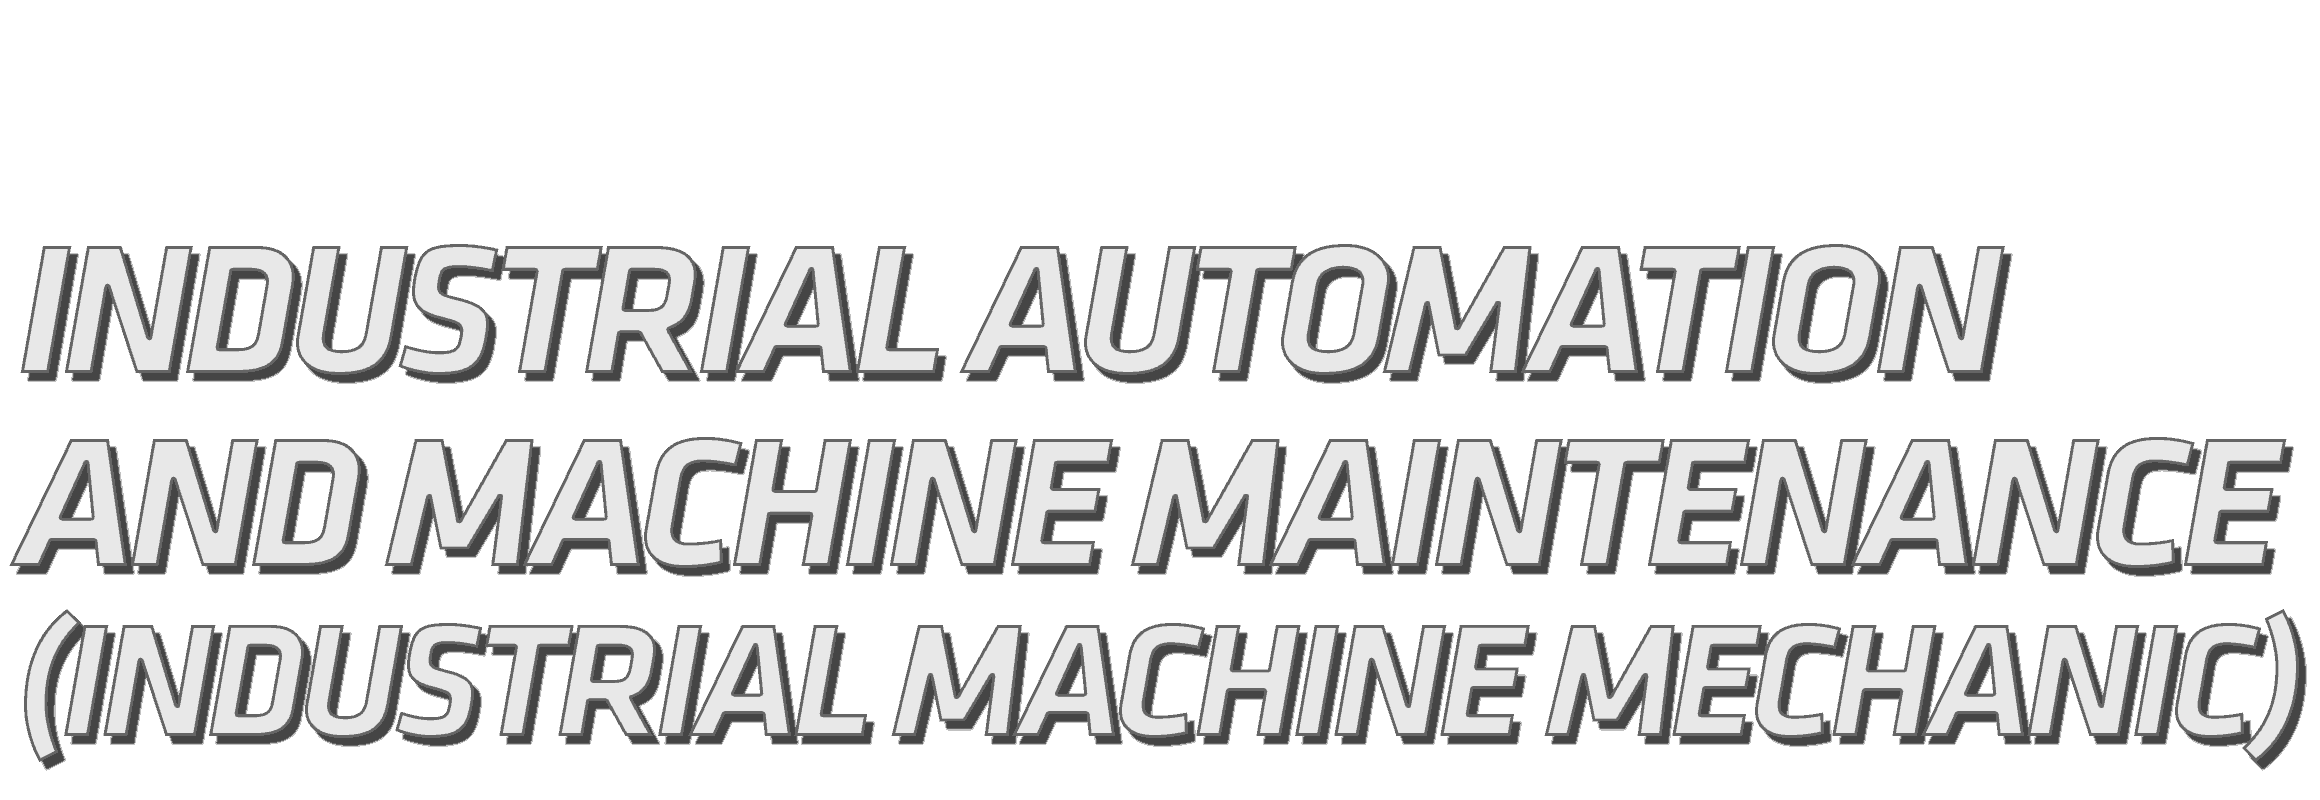 Industrial Automation and Machine Maintenance (Industrial Machine Mechanic)